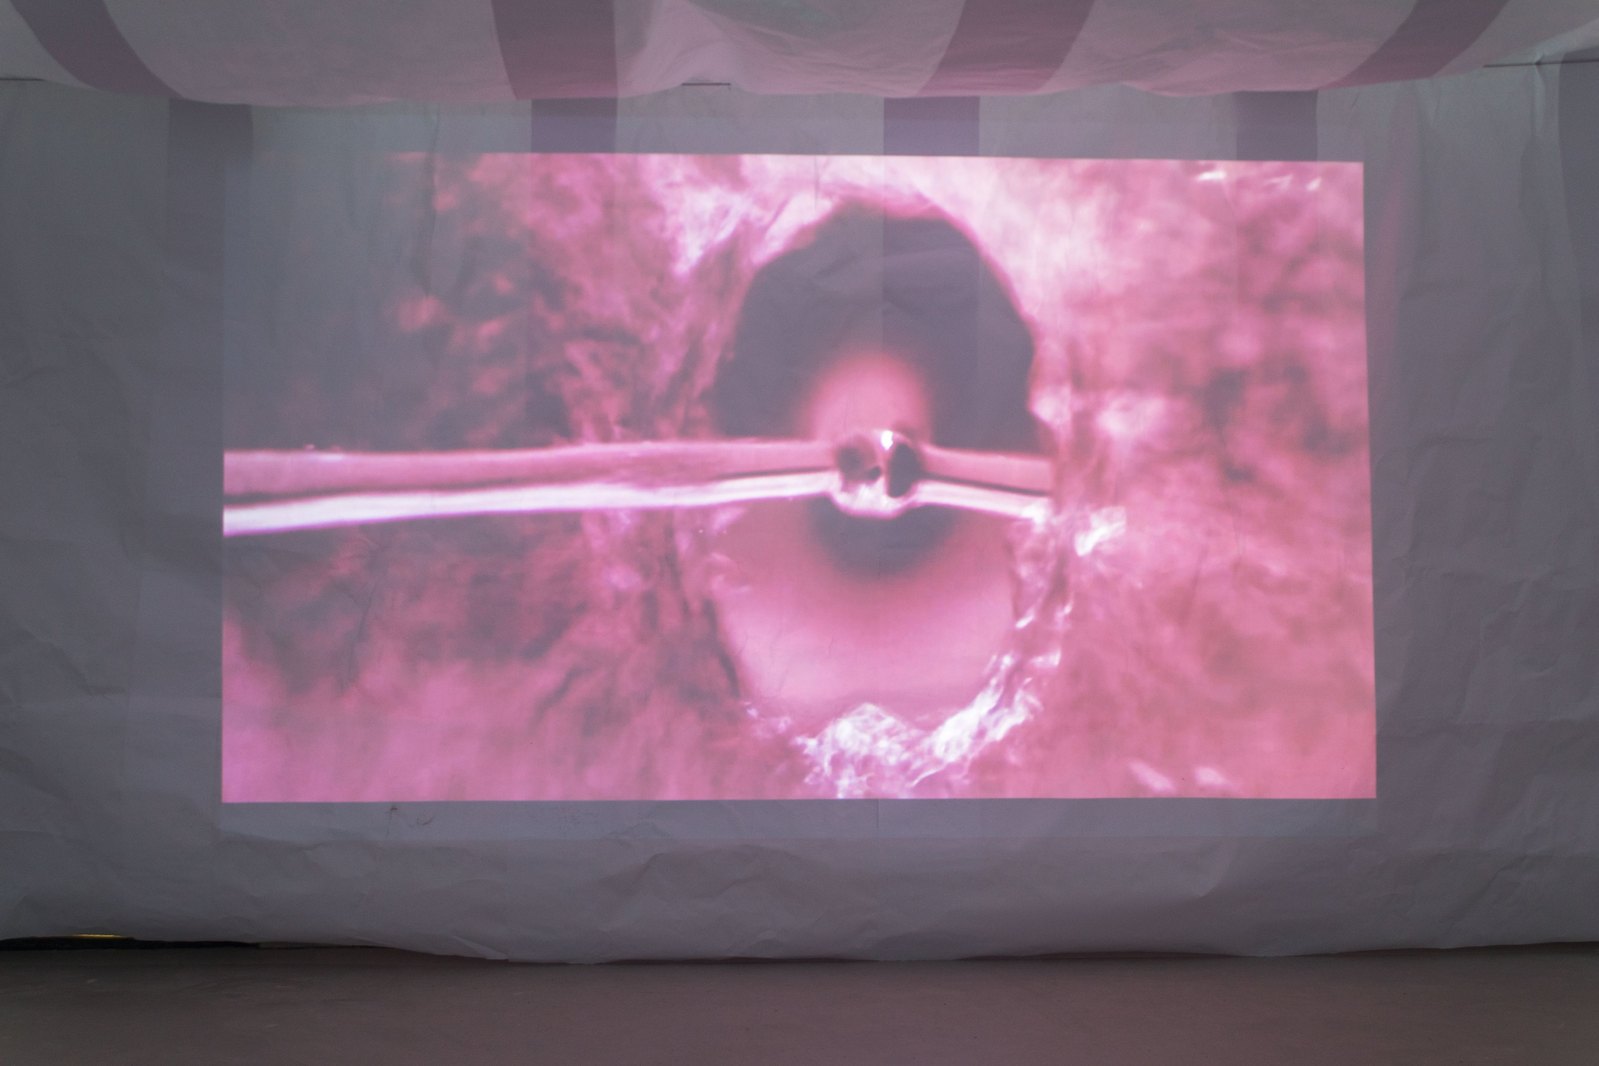 Projection onto paper showing a purple tinted image of water pouring onto a mirror, rotated 90 degrees. Jamie Kane